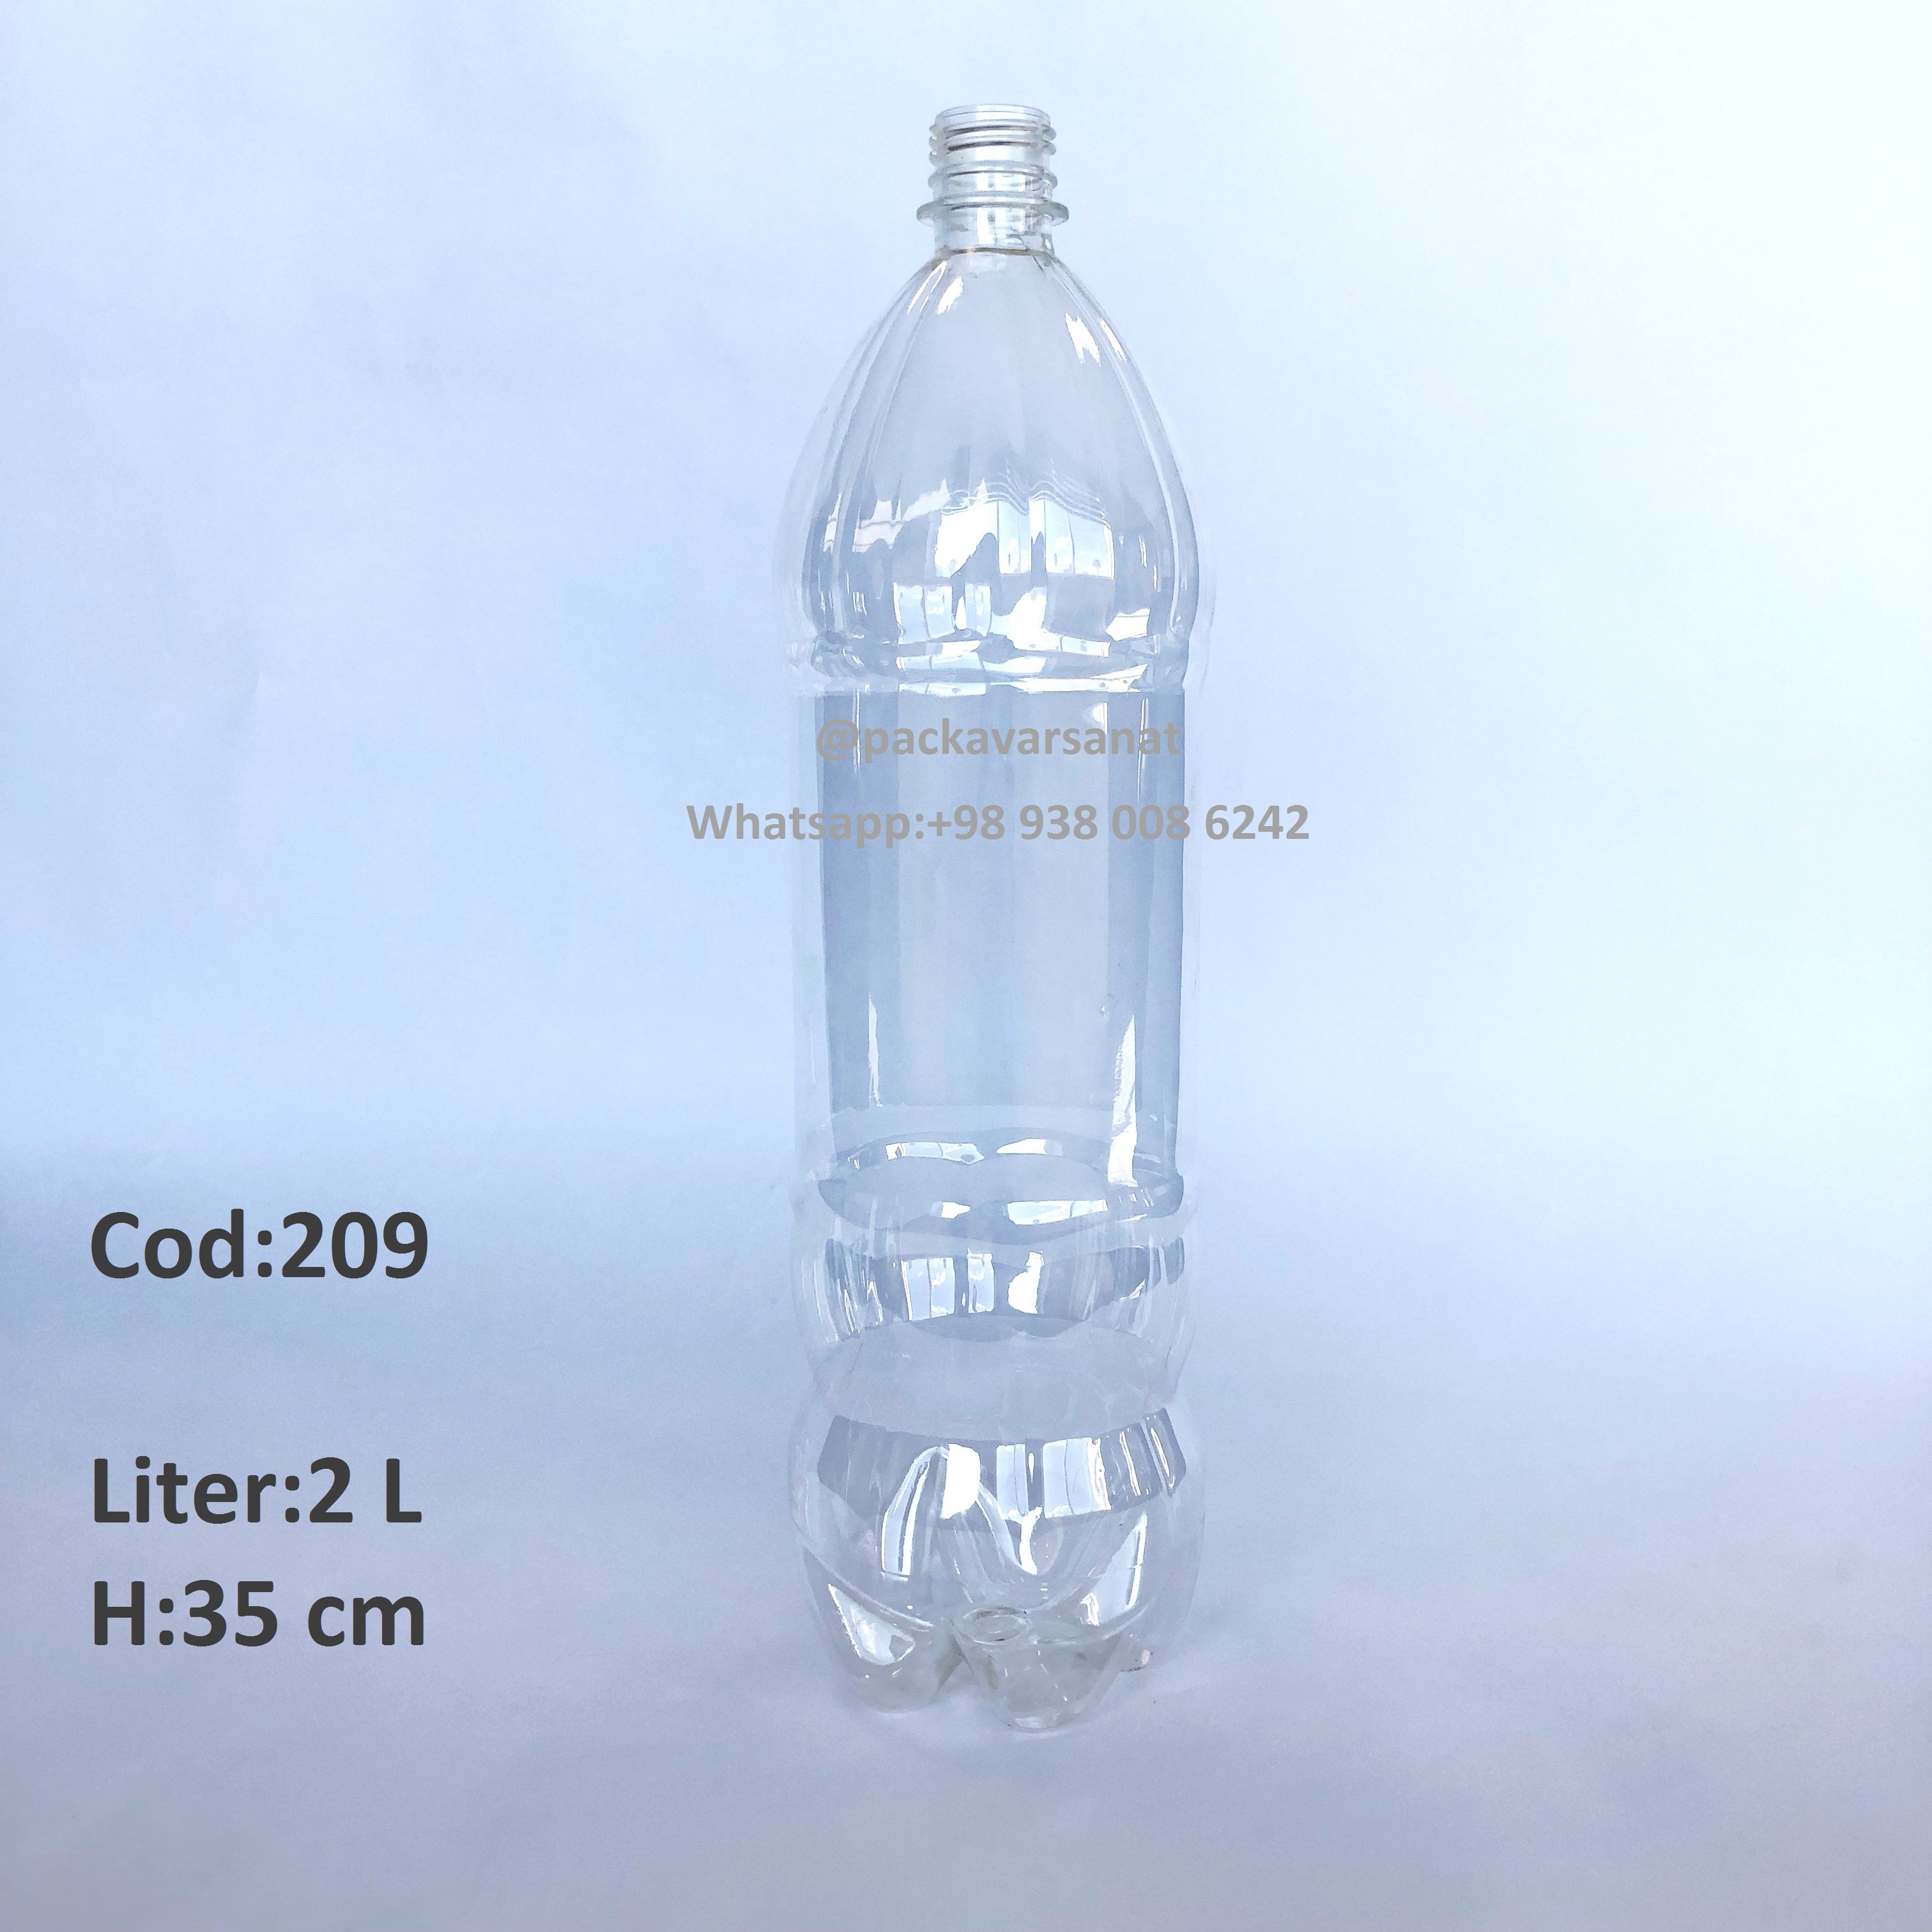 You are currently viewing 2 liters